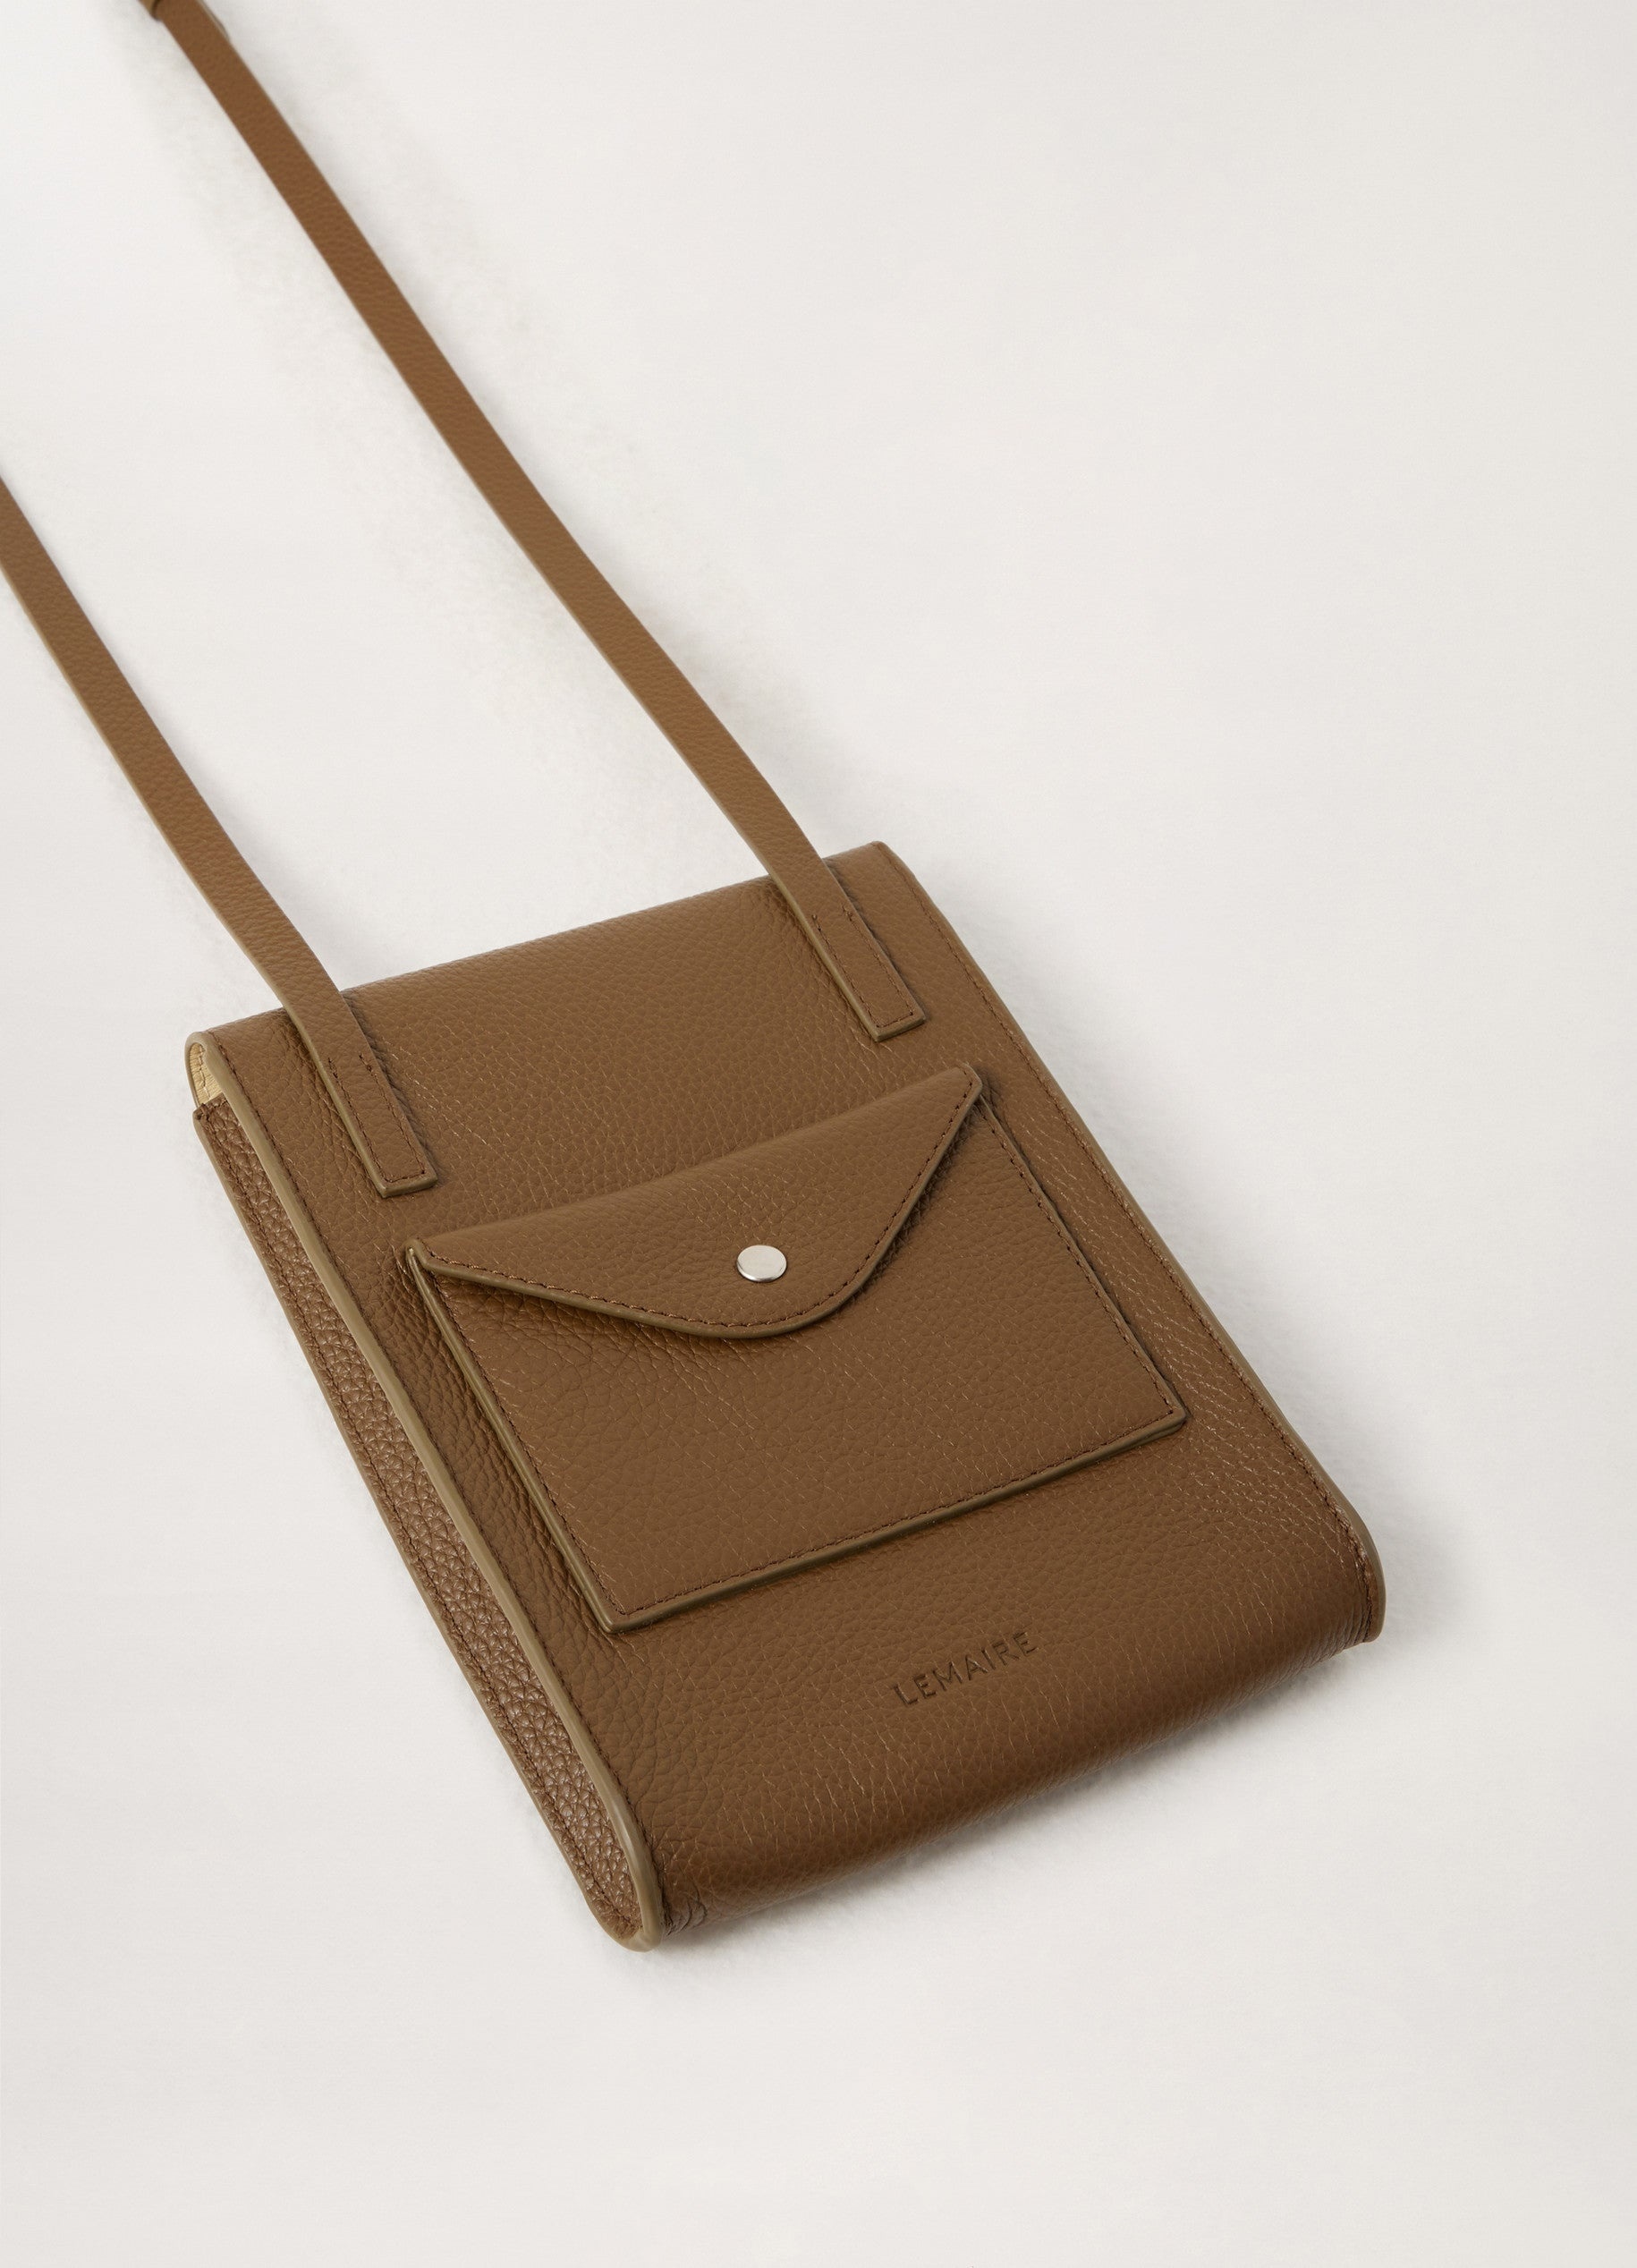 ENVELOPPE WITH STRAP
SOFT GRAINED LEATHER - 4